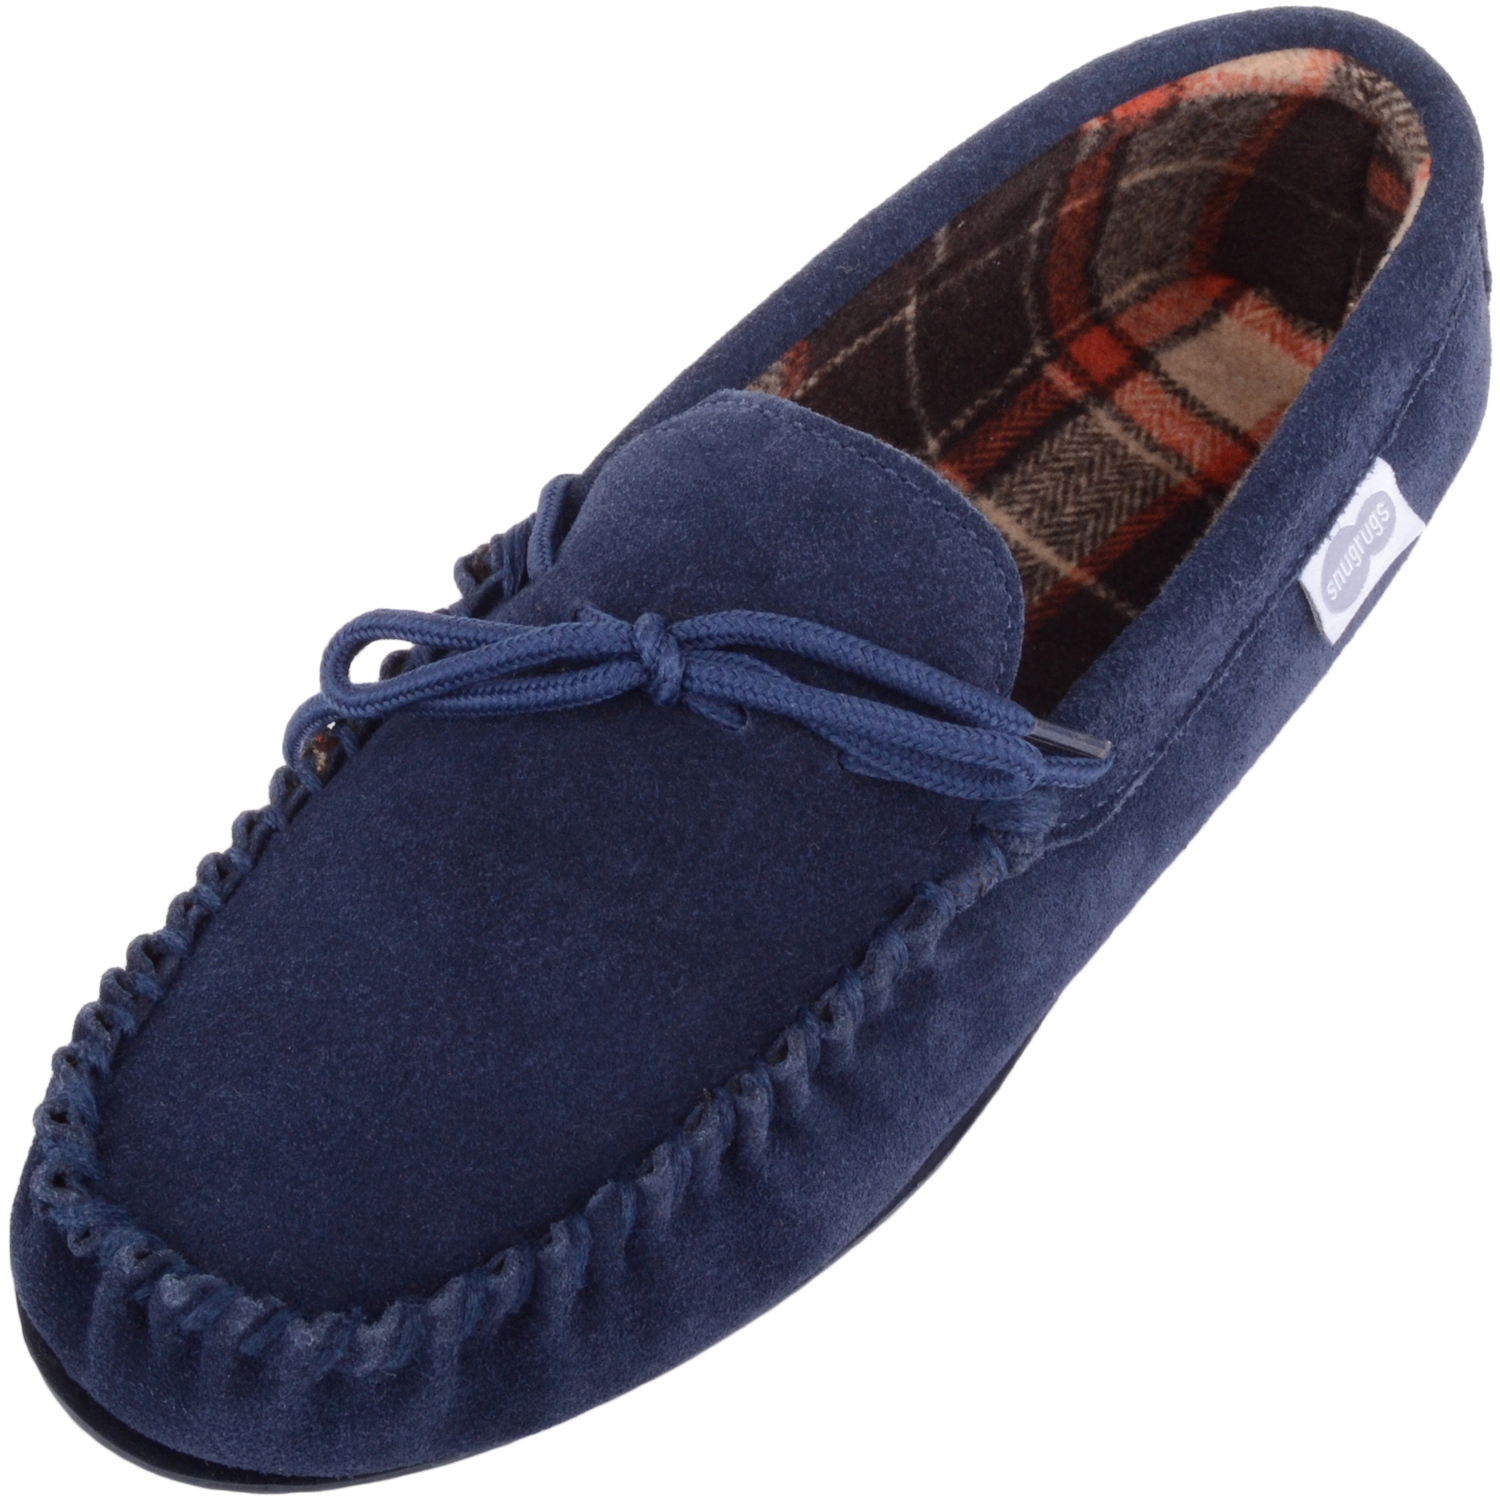 Lodgemok Mens Navy Real Suede Polar Fleece Lined Moccasins Slippers